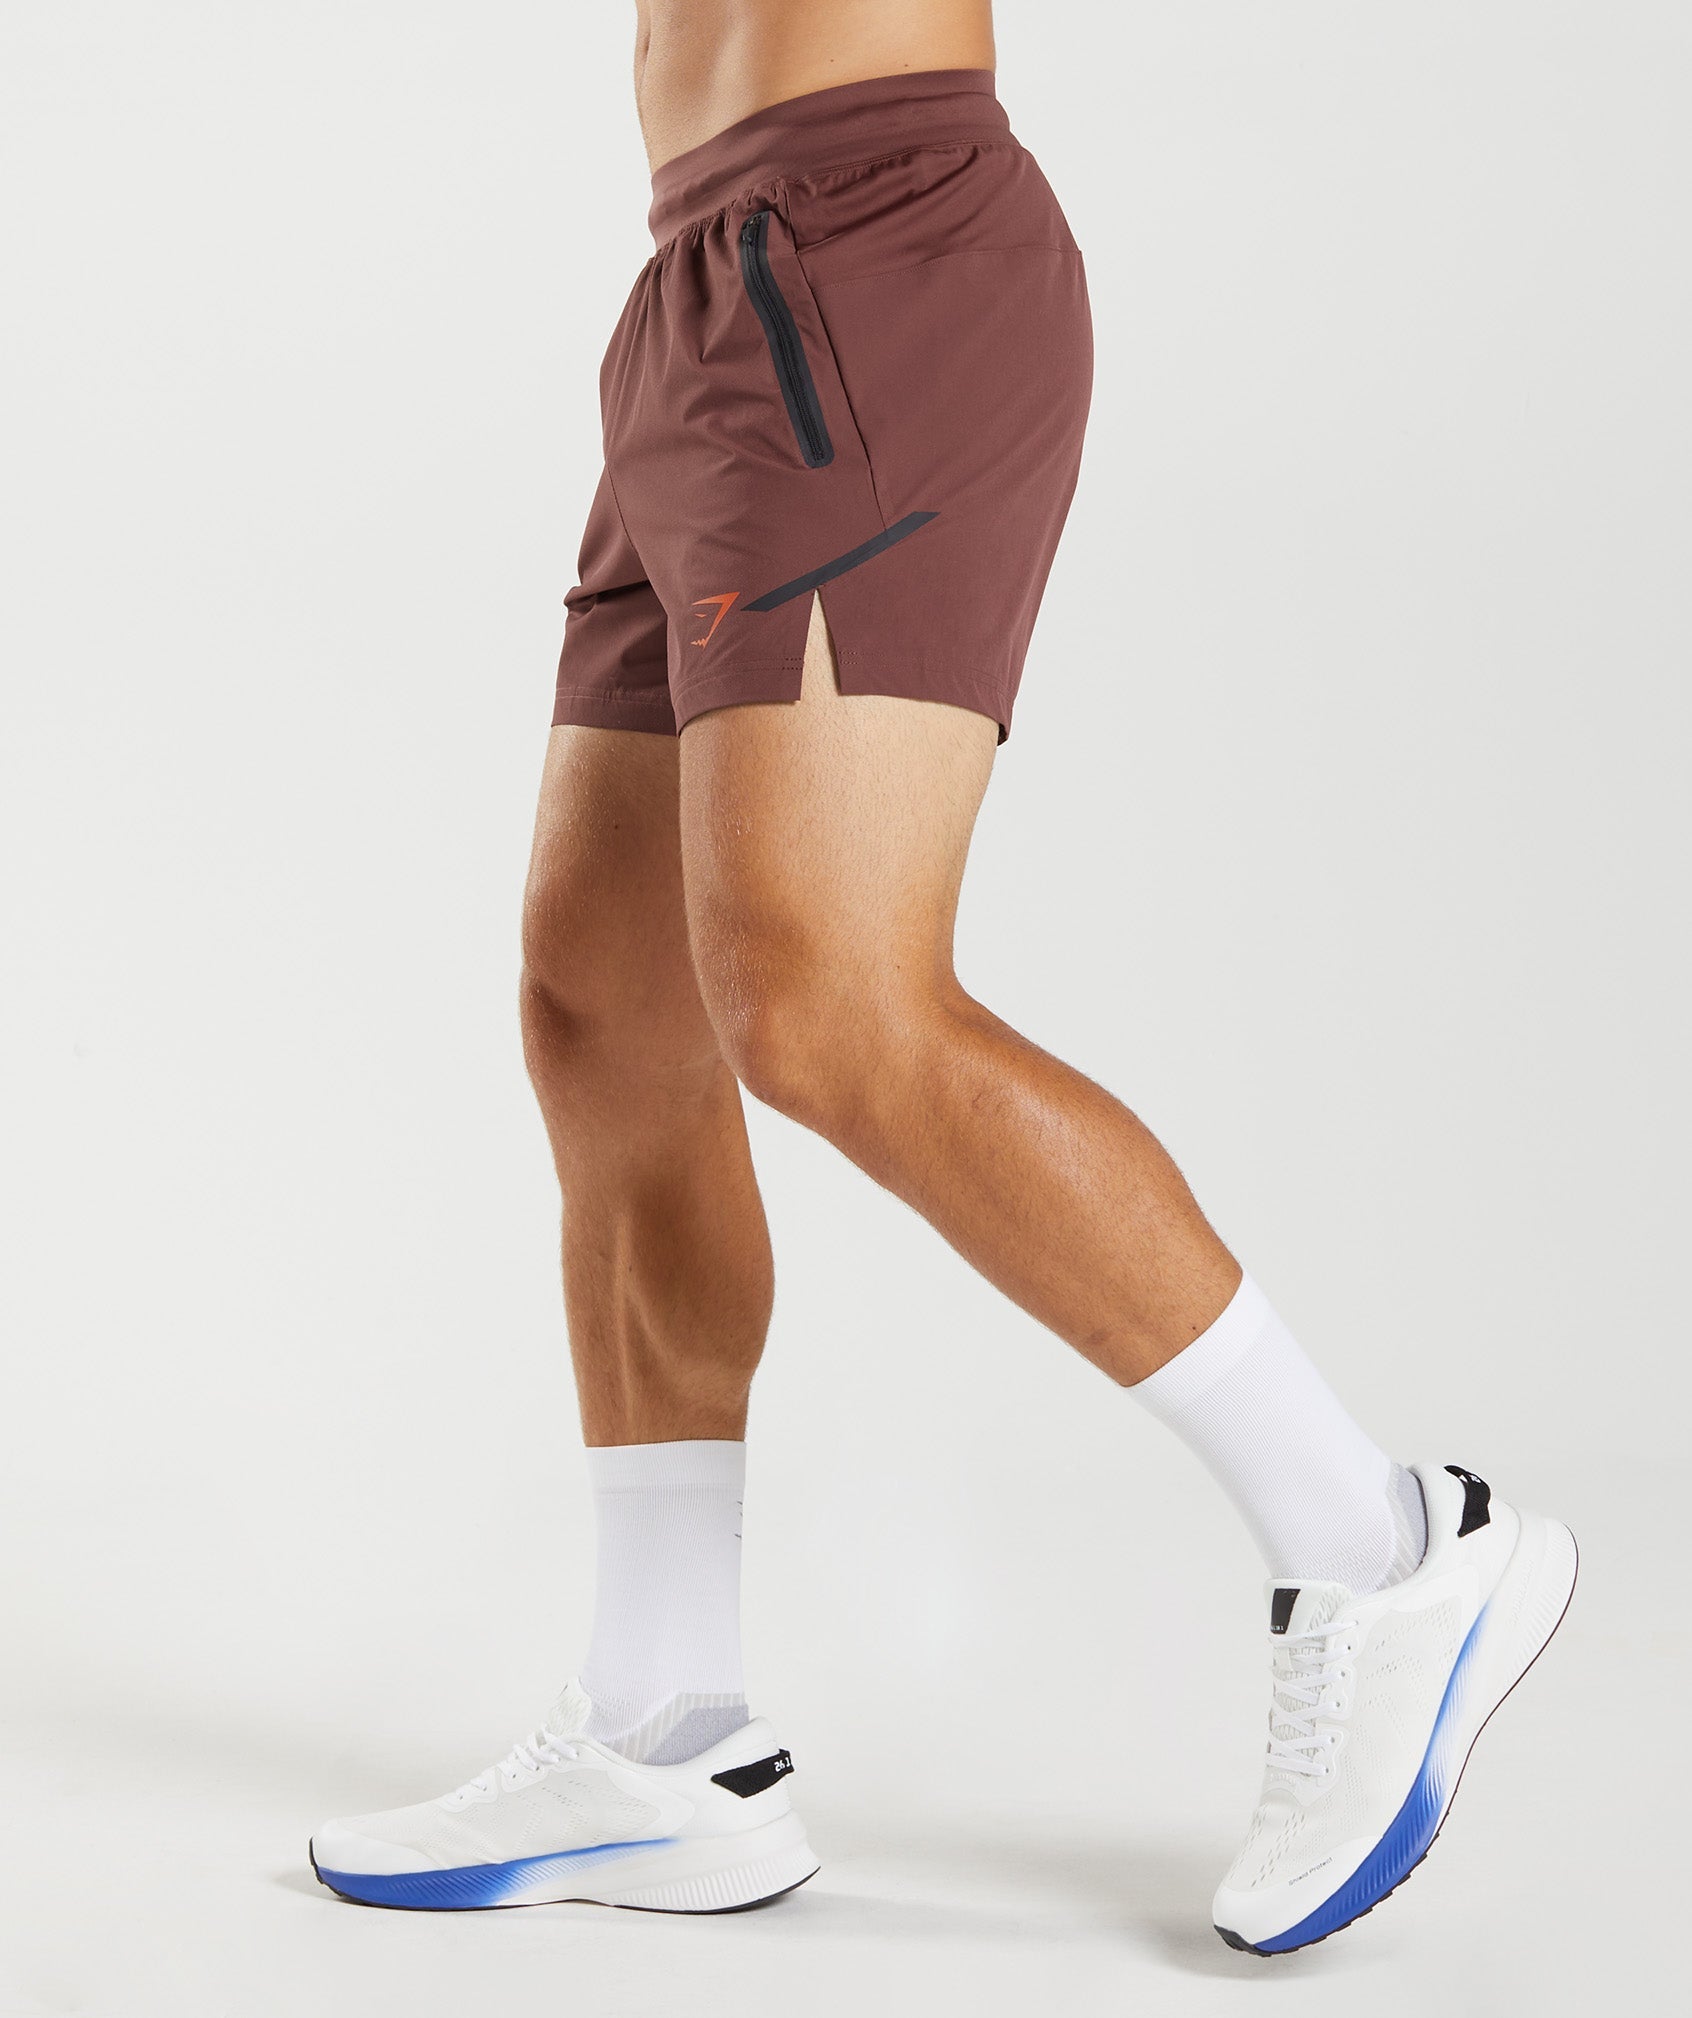 Apex 5" Perform Shorts in Cherry Brown - view 2